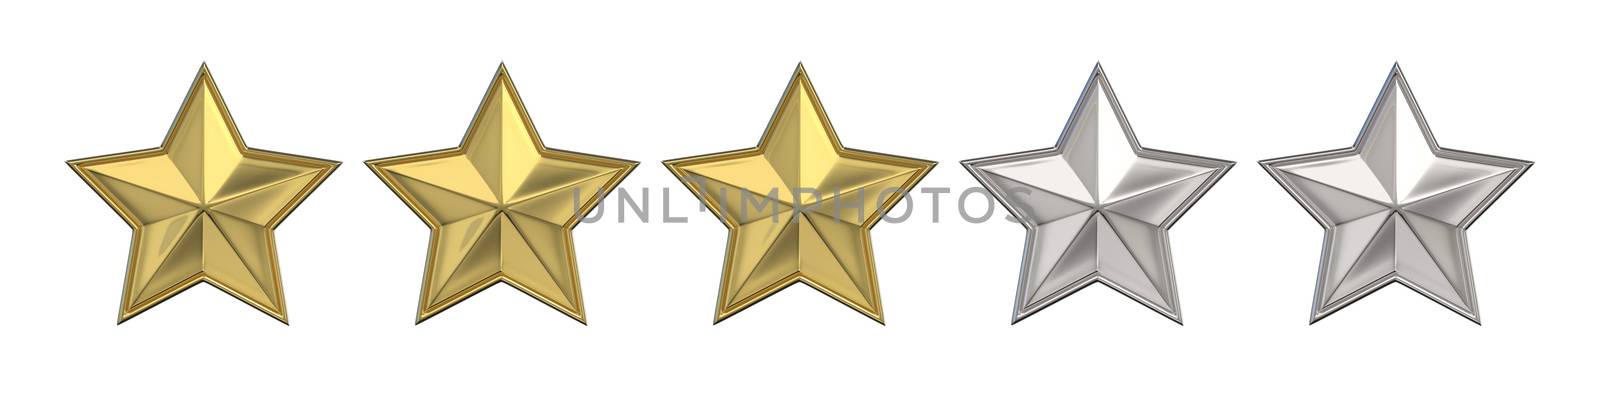 Voting concept. Rating three golden stars. 3D render illustration isolated on white background